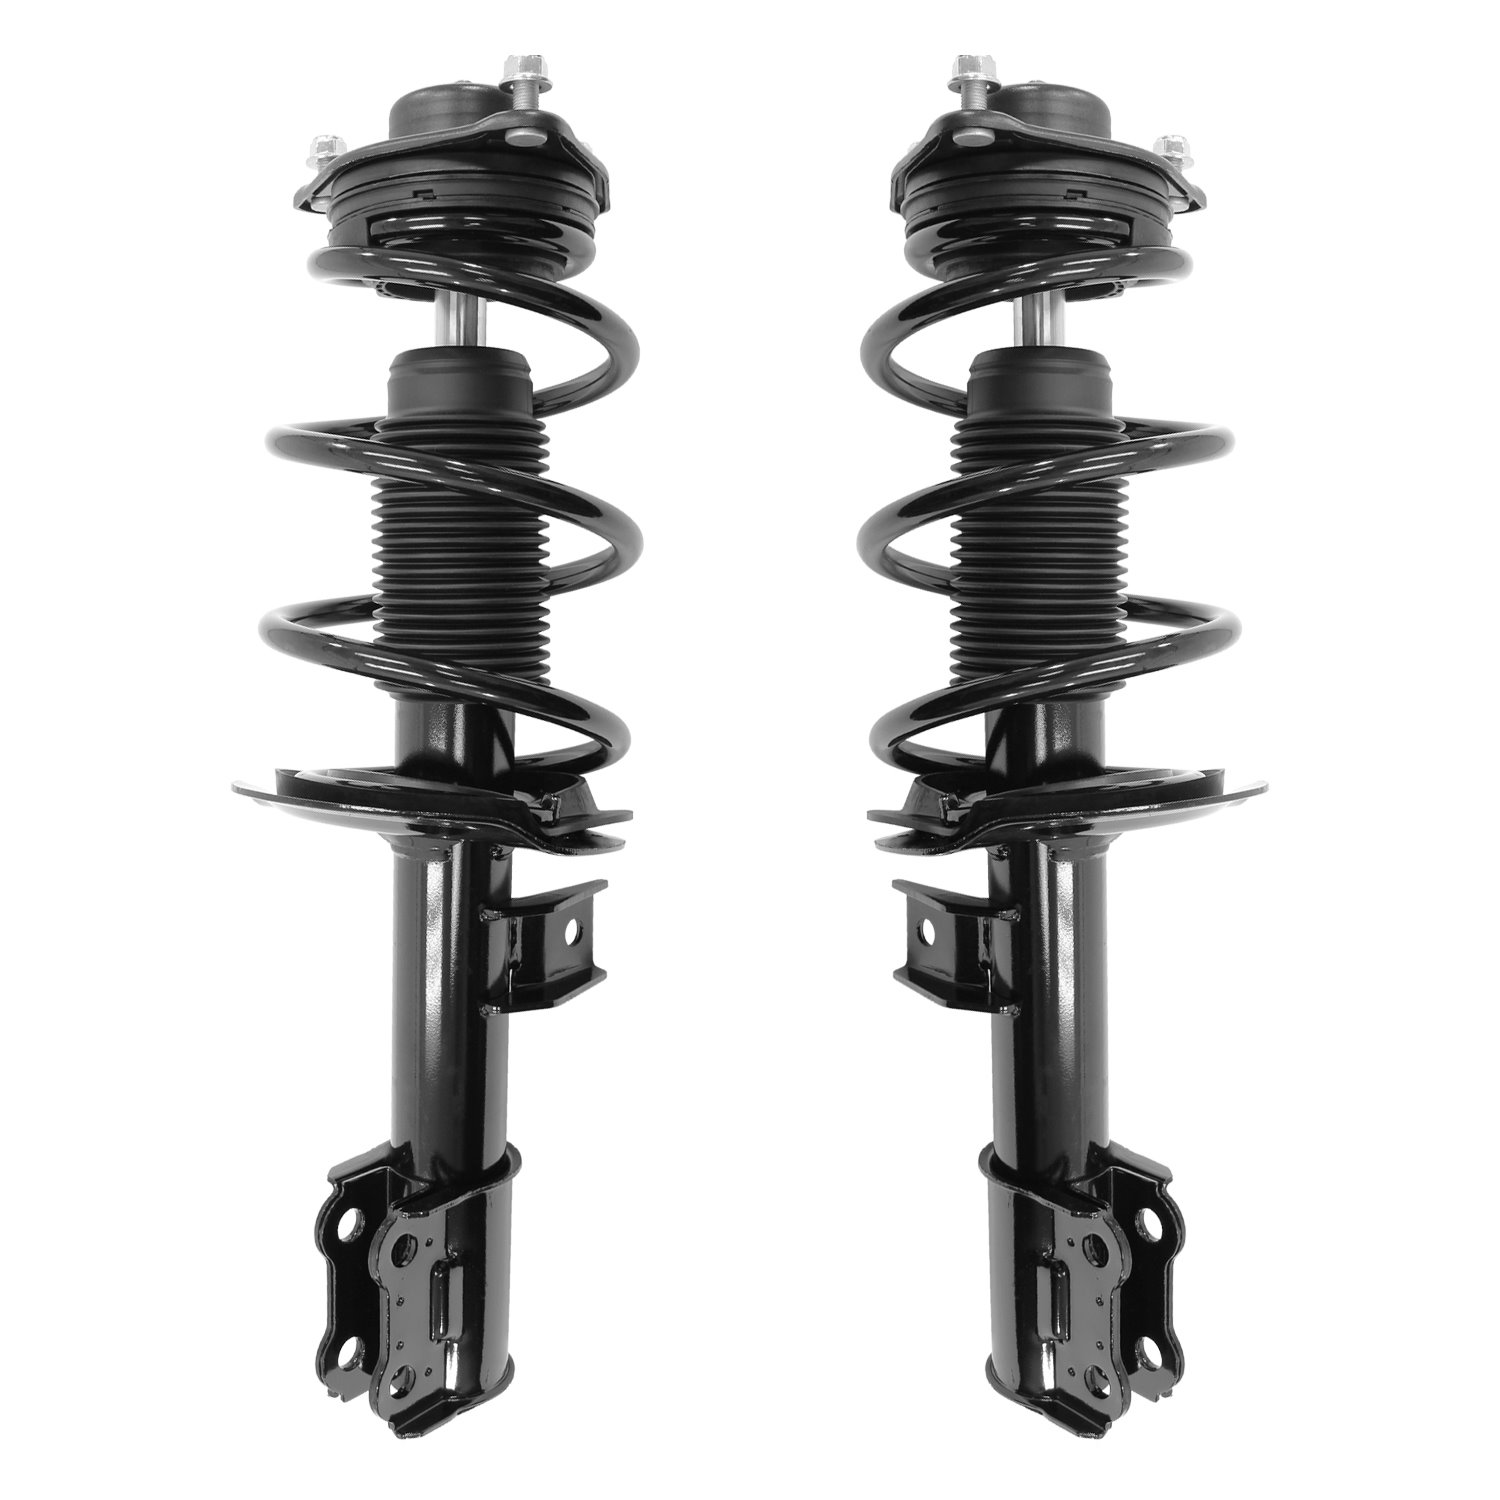 2-11167-11168-001 Front Suspension Strut & Coil Spring Assemby Set Fits Select Hyundai Genesis Coupe